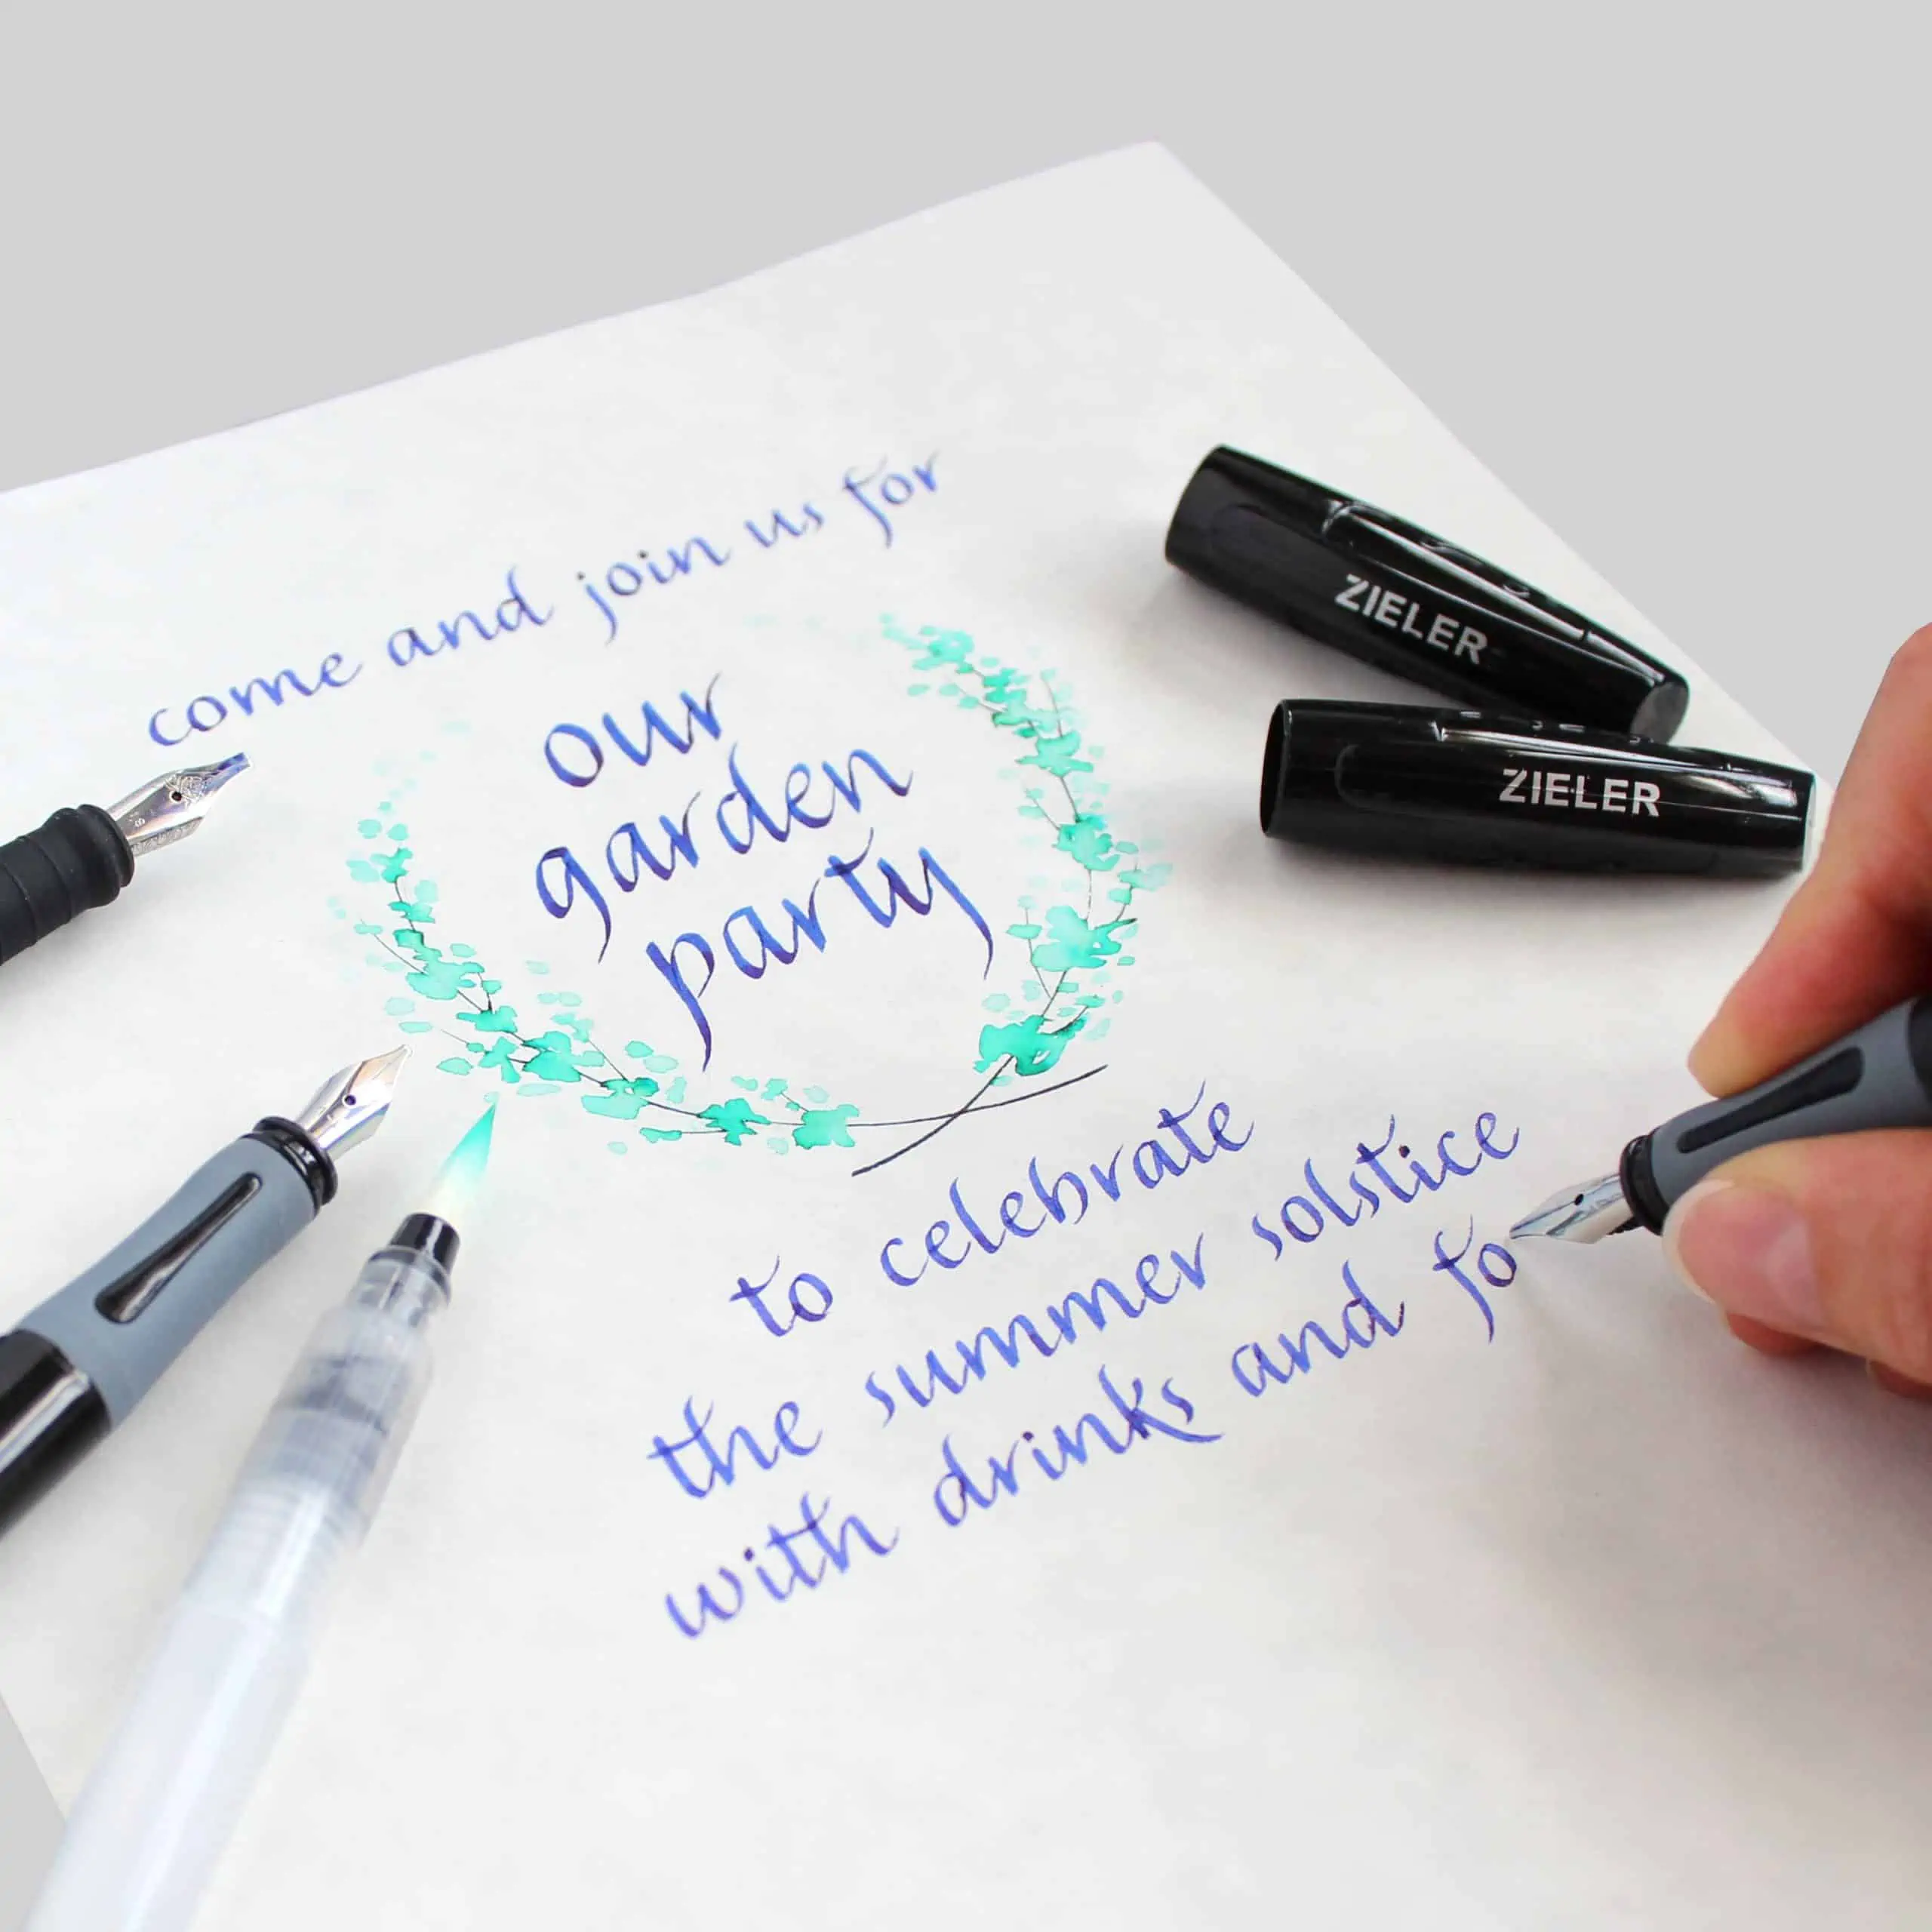 Calligraphy – Margret puts pen to paper